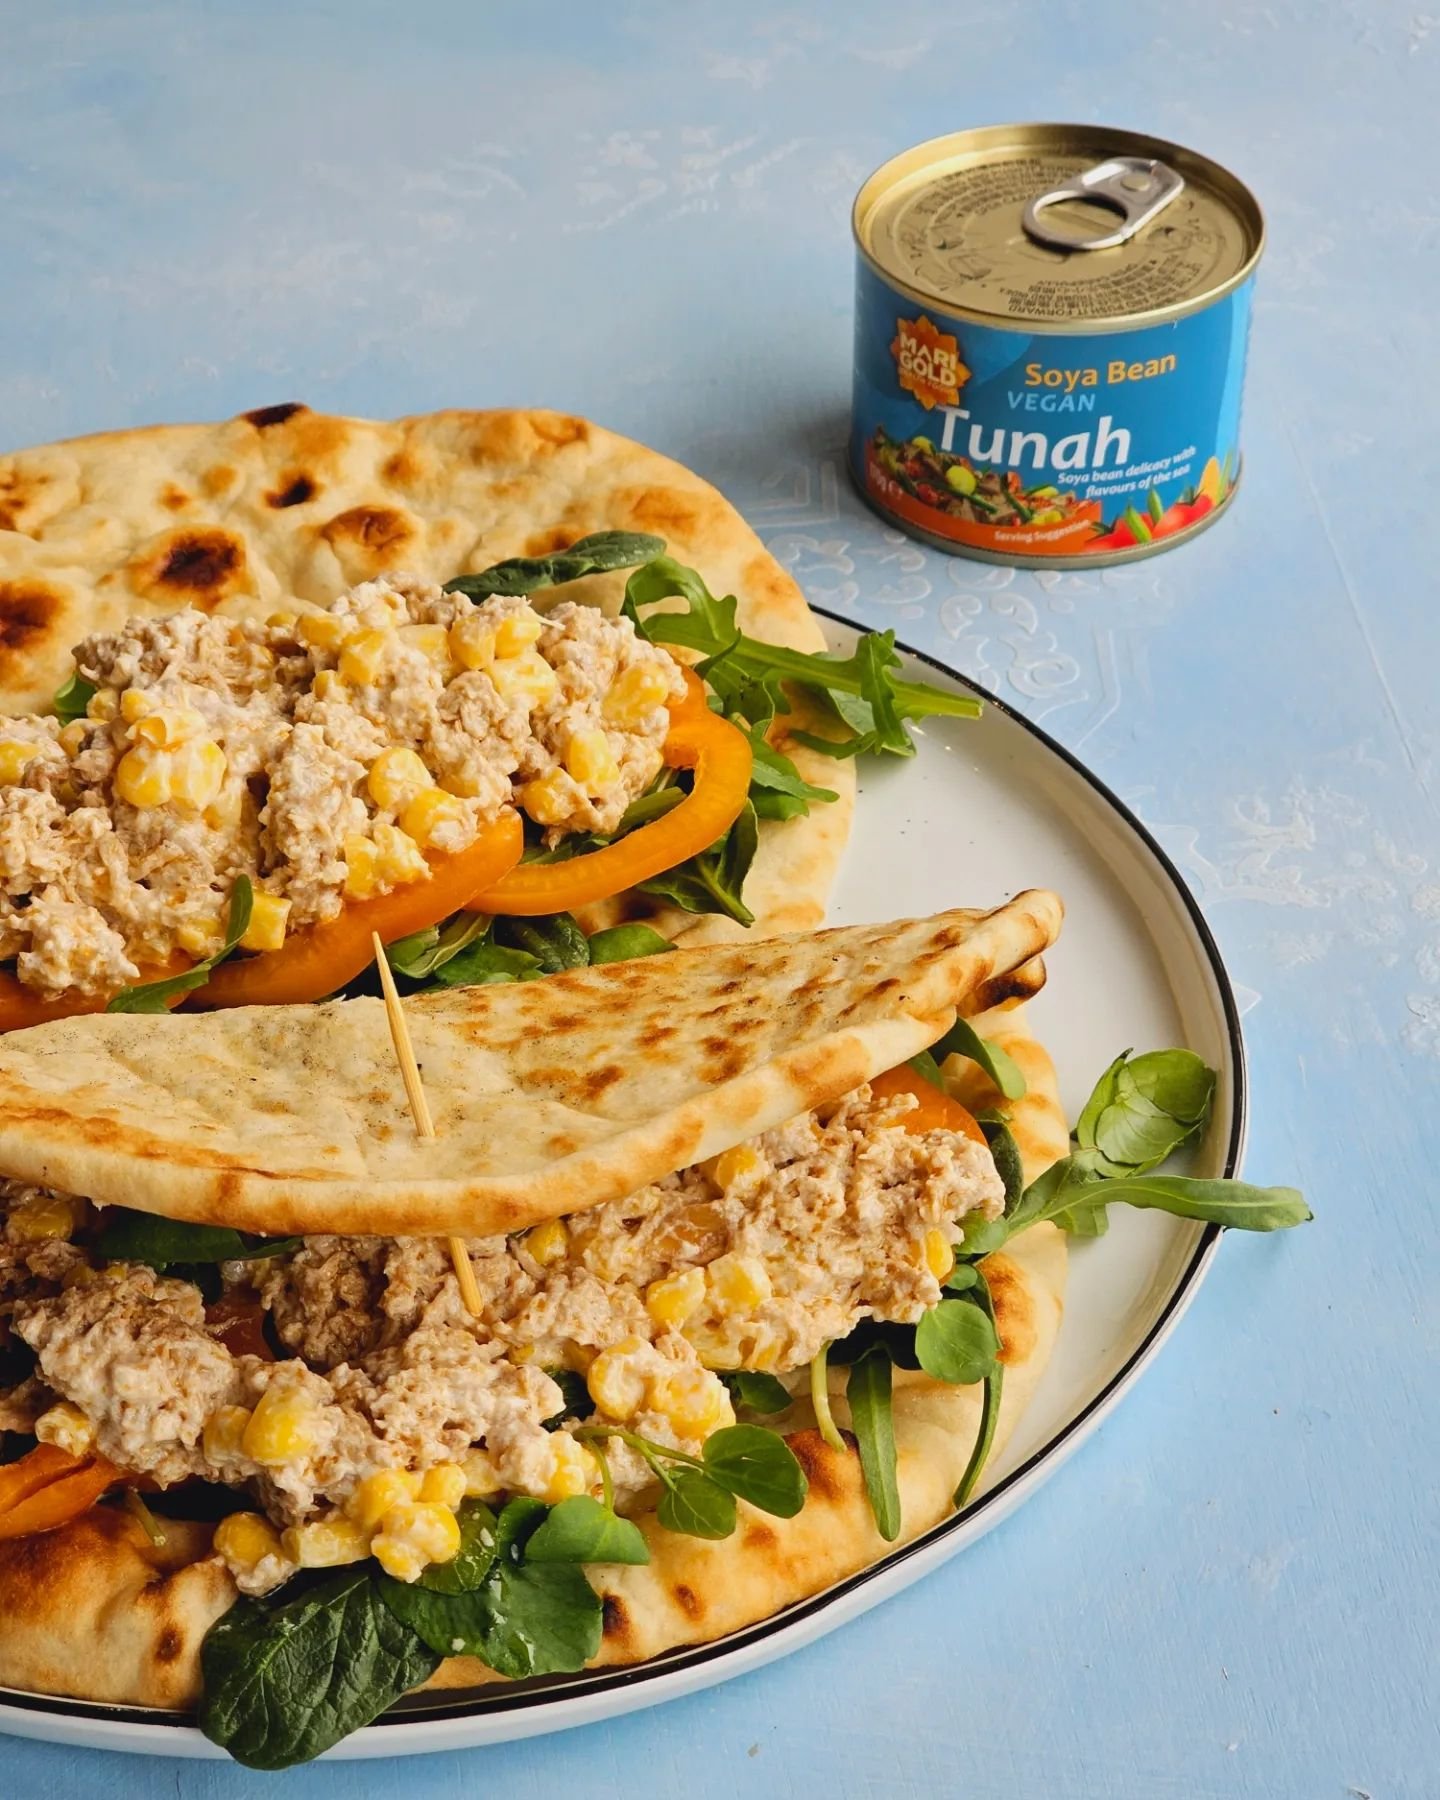 SATURDAY LUNCH INSPO?
👍😋
It's been all about tunah this week - so we thought we would finish the theme with our delish tunah wraps made with frozen sweetcorn (defrosted of course!), veg mayo and some seasoning. We have used paprika
💥
World Tuna da